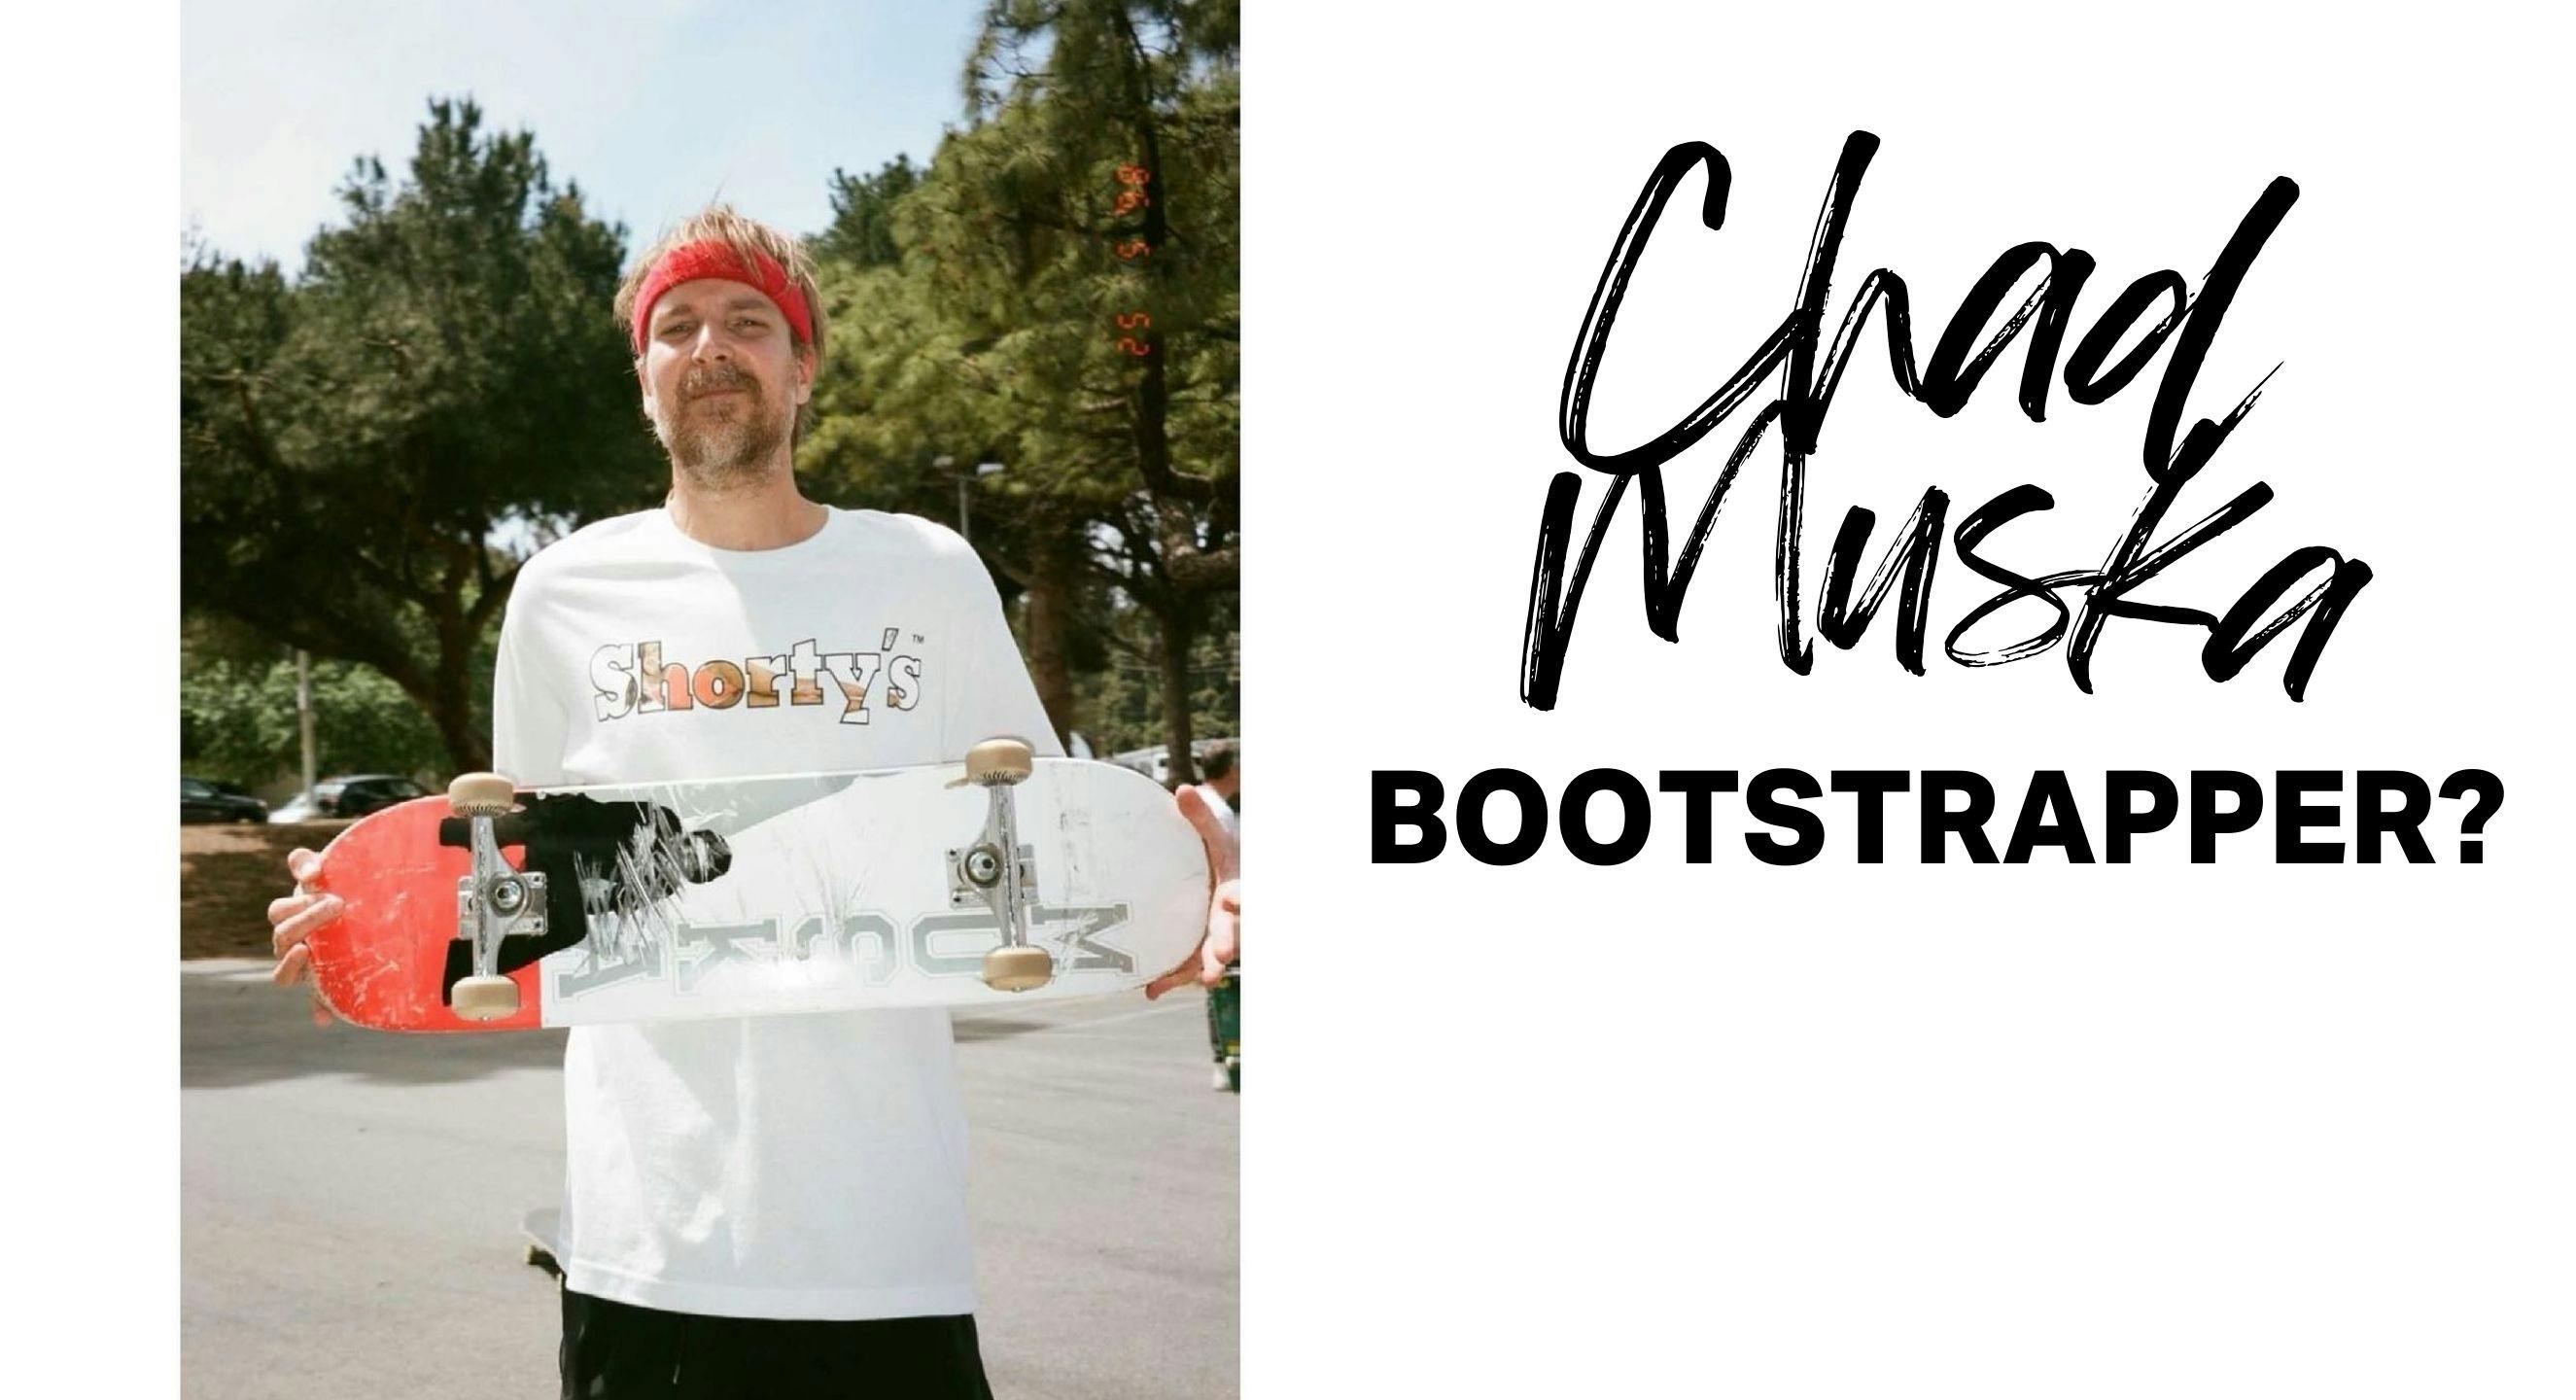 Is Chad Muska a bootstrapper?